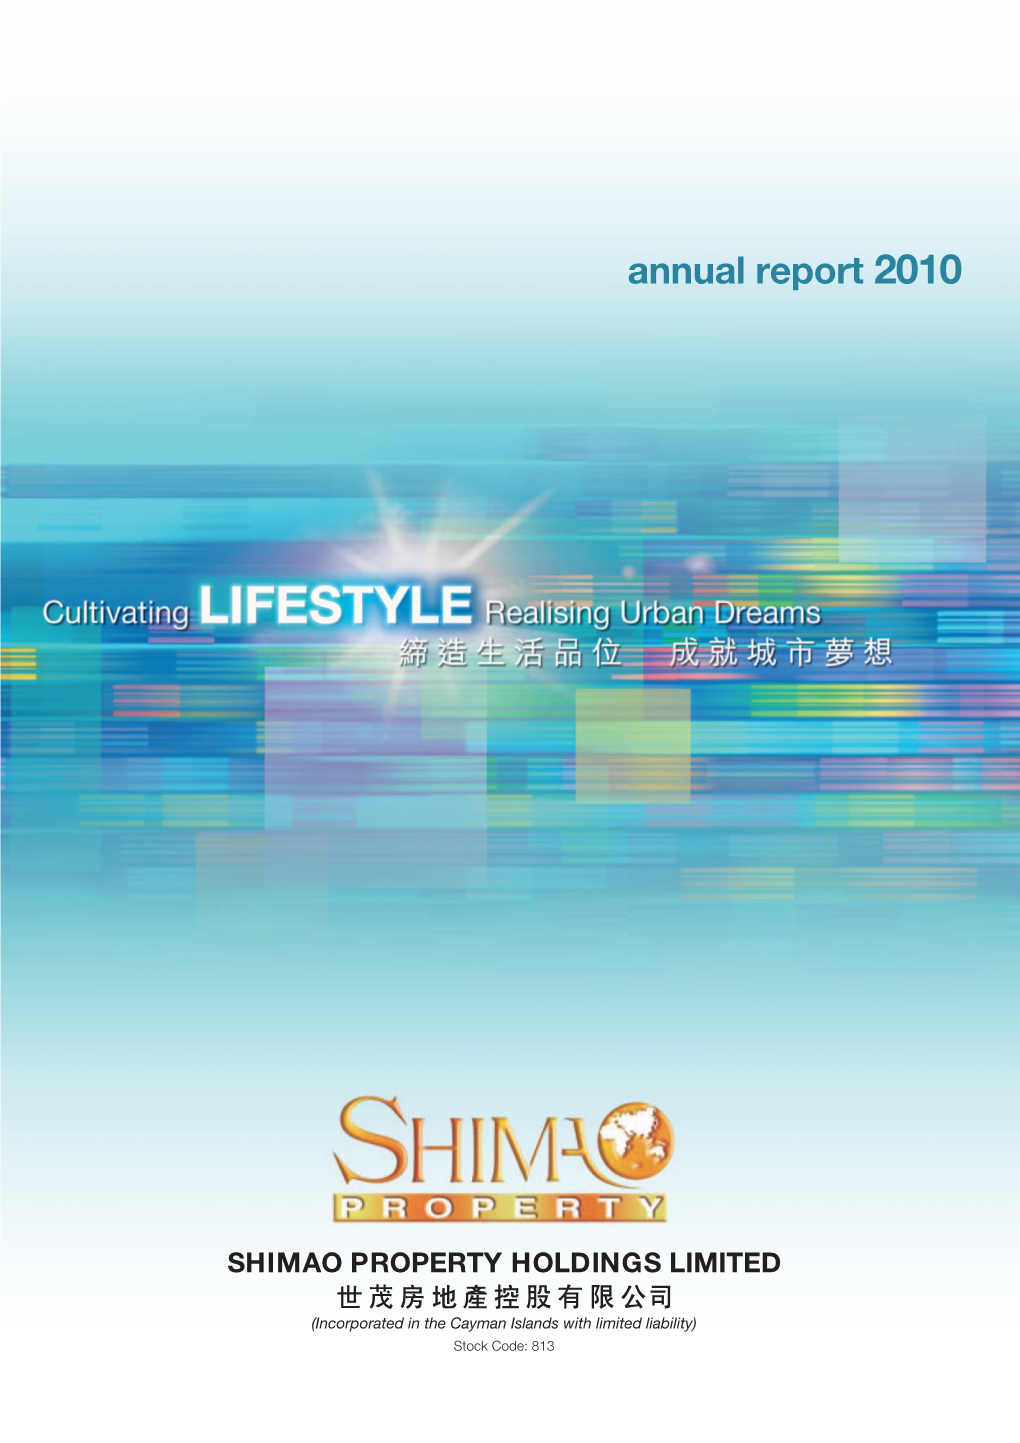 Annual Report 2010 Annual Report 2010 年報 Sshimahima AAR10 Insider10 Inside Bbackack Ccover Aw.Pageover Aw.Page 1 22011/4/2011/4/2 ¤¤W¤ÈW¤È 001:12:1:12:5533